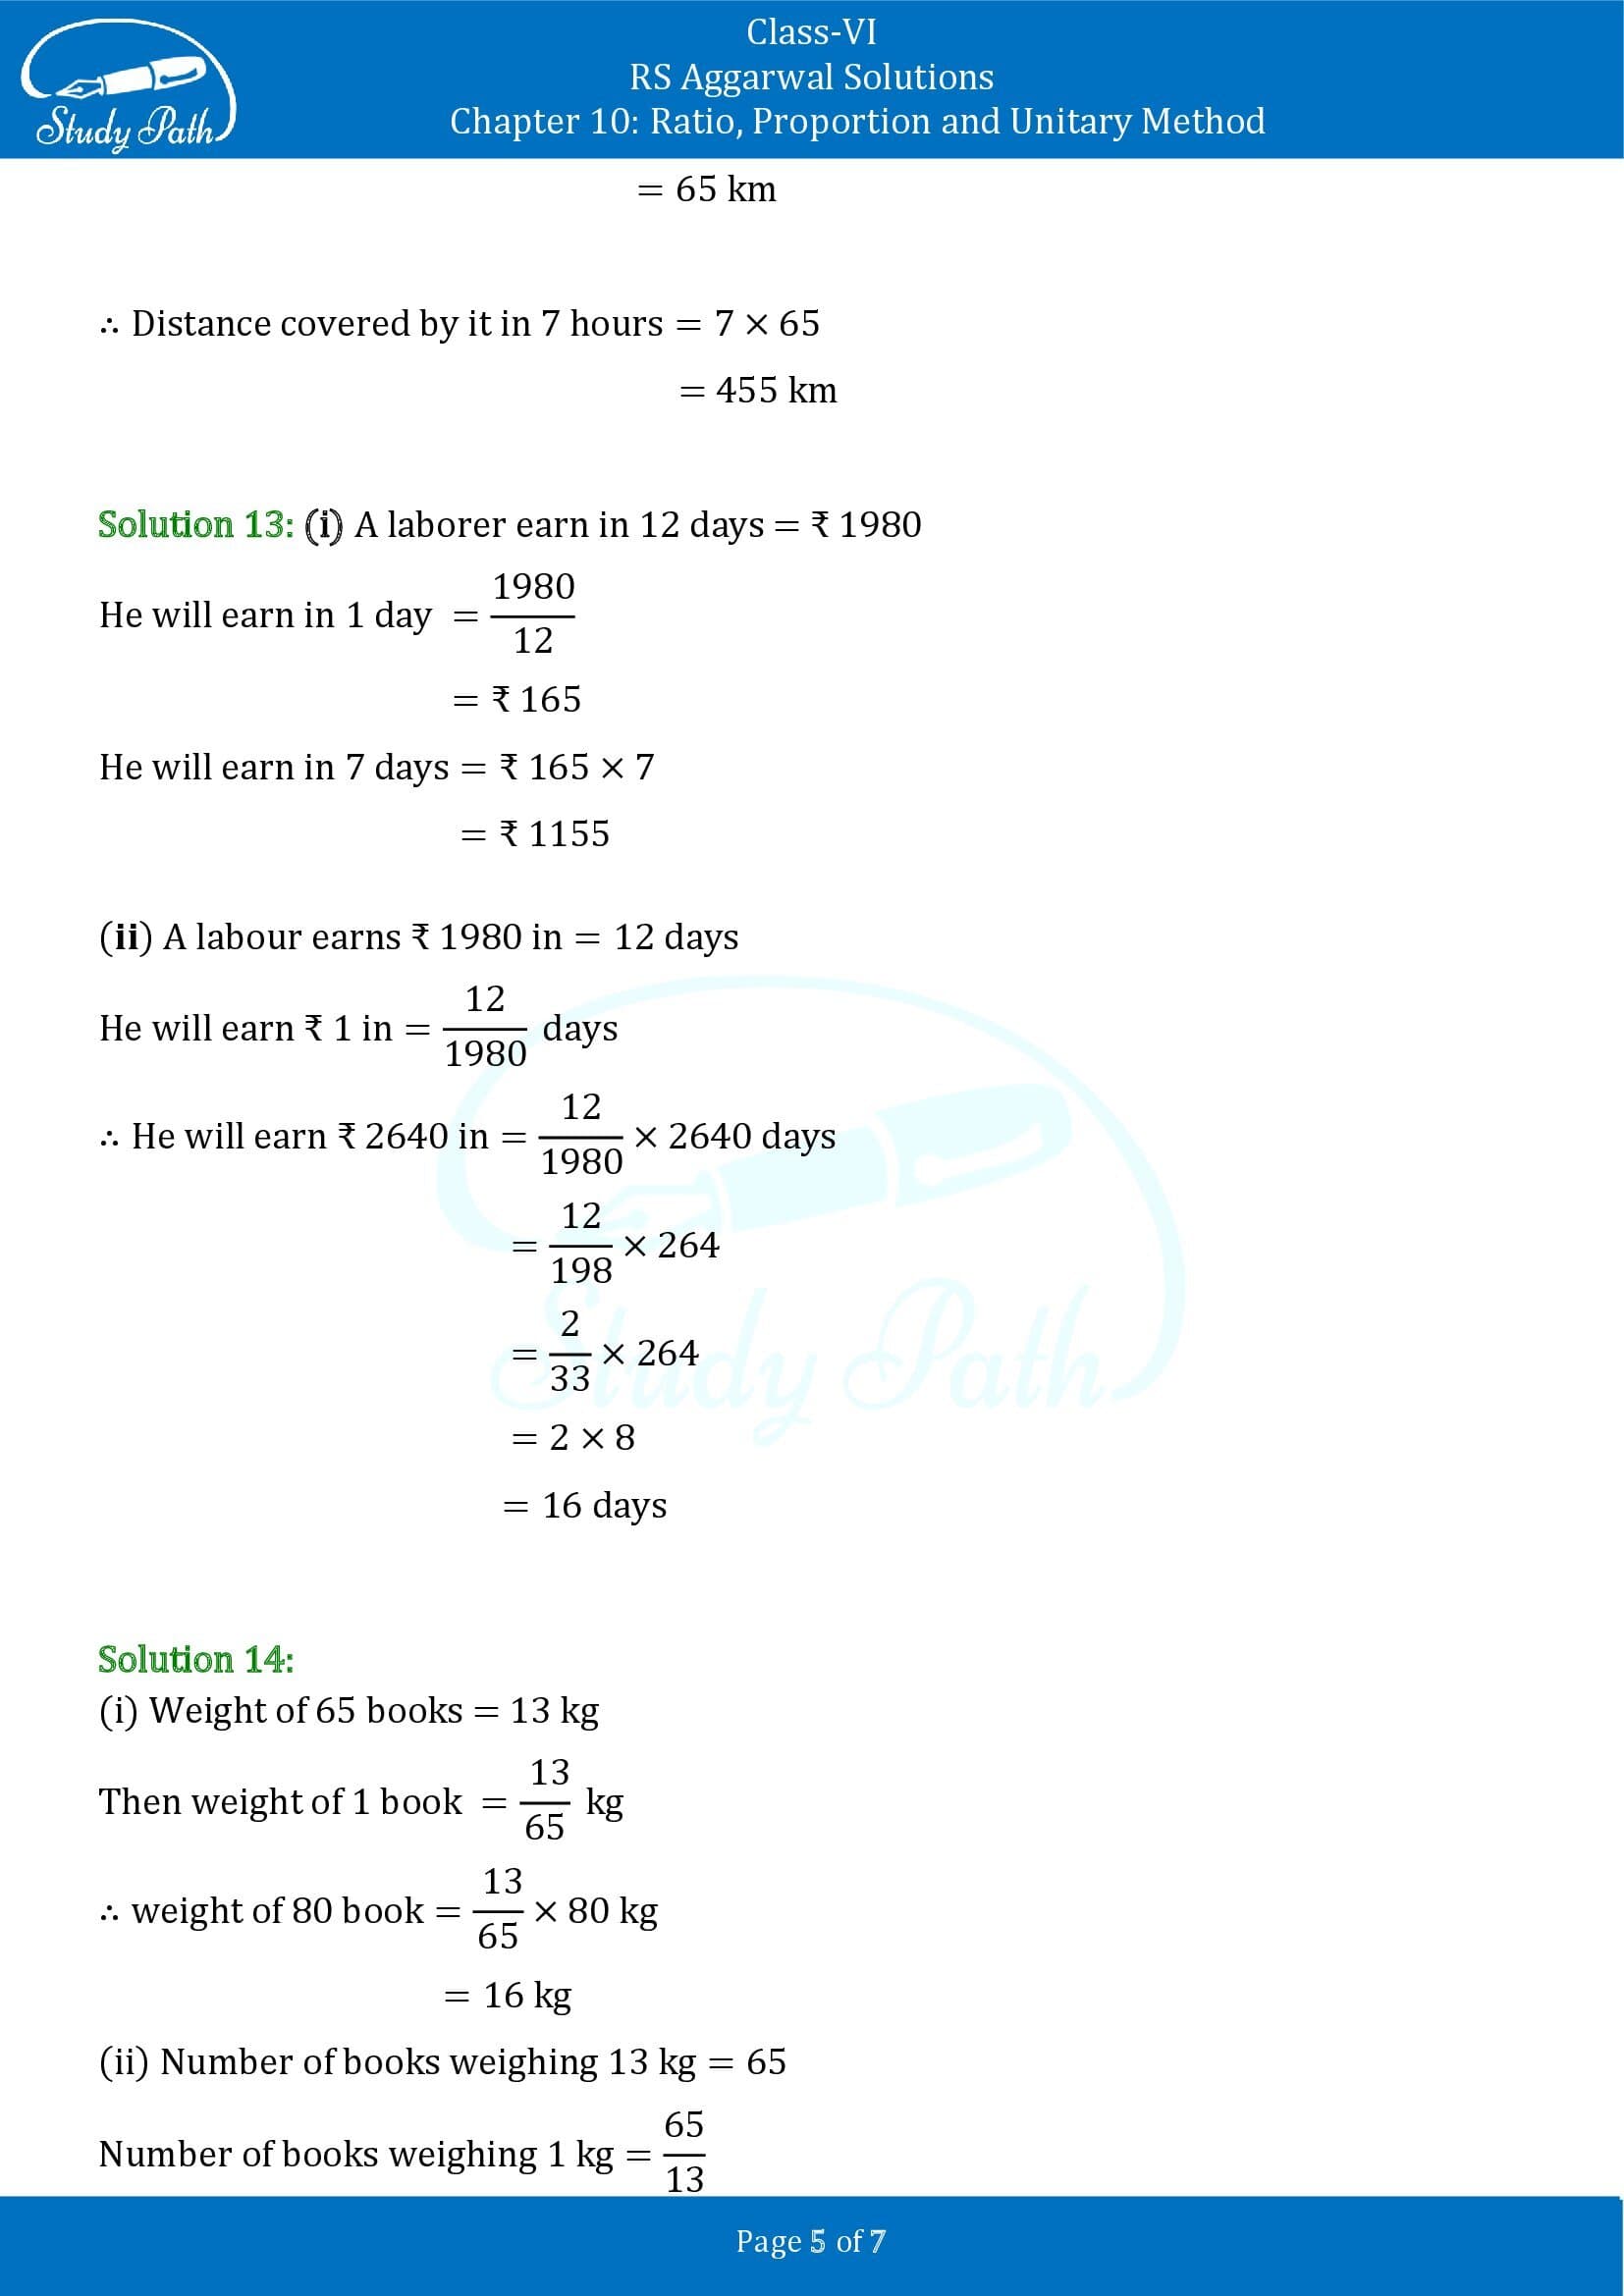 RS Aggarwal Solutions Class 6 Chapter 10 Ratio Proportion and Unitary Method Exercise 10C 00005